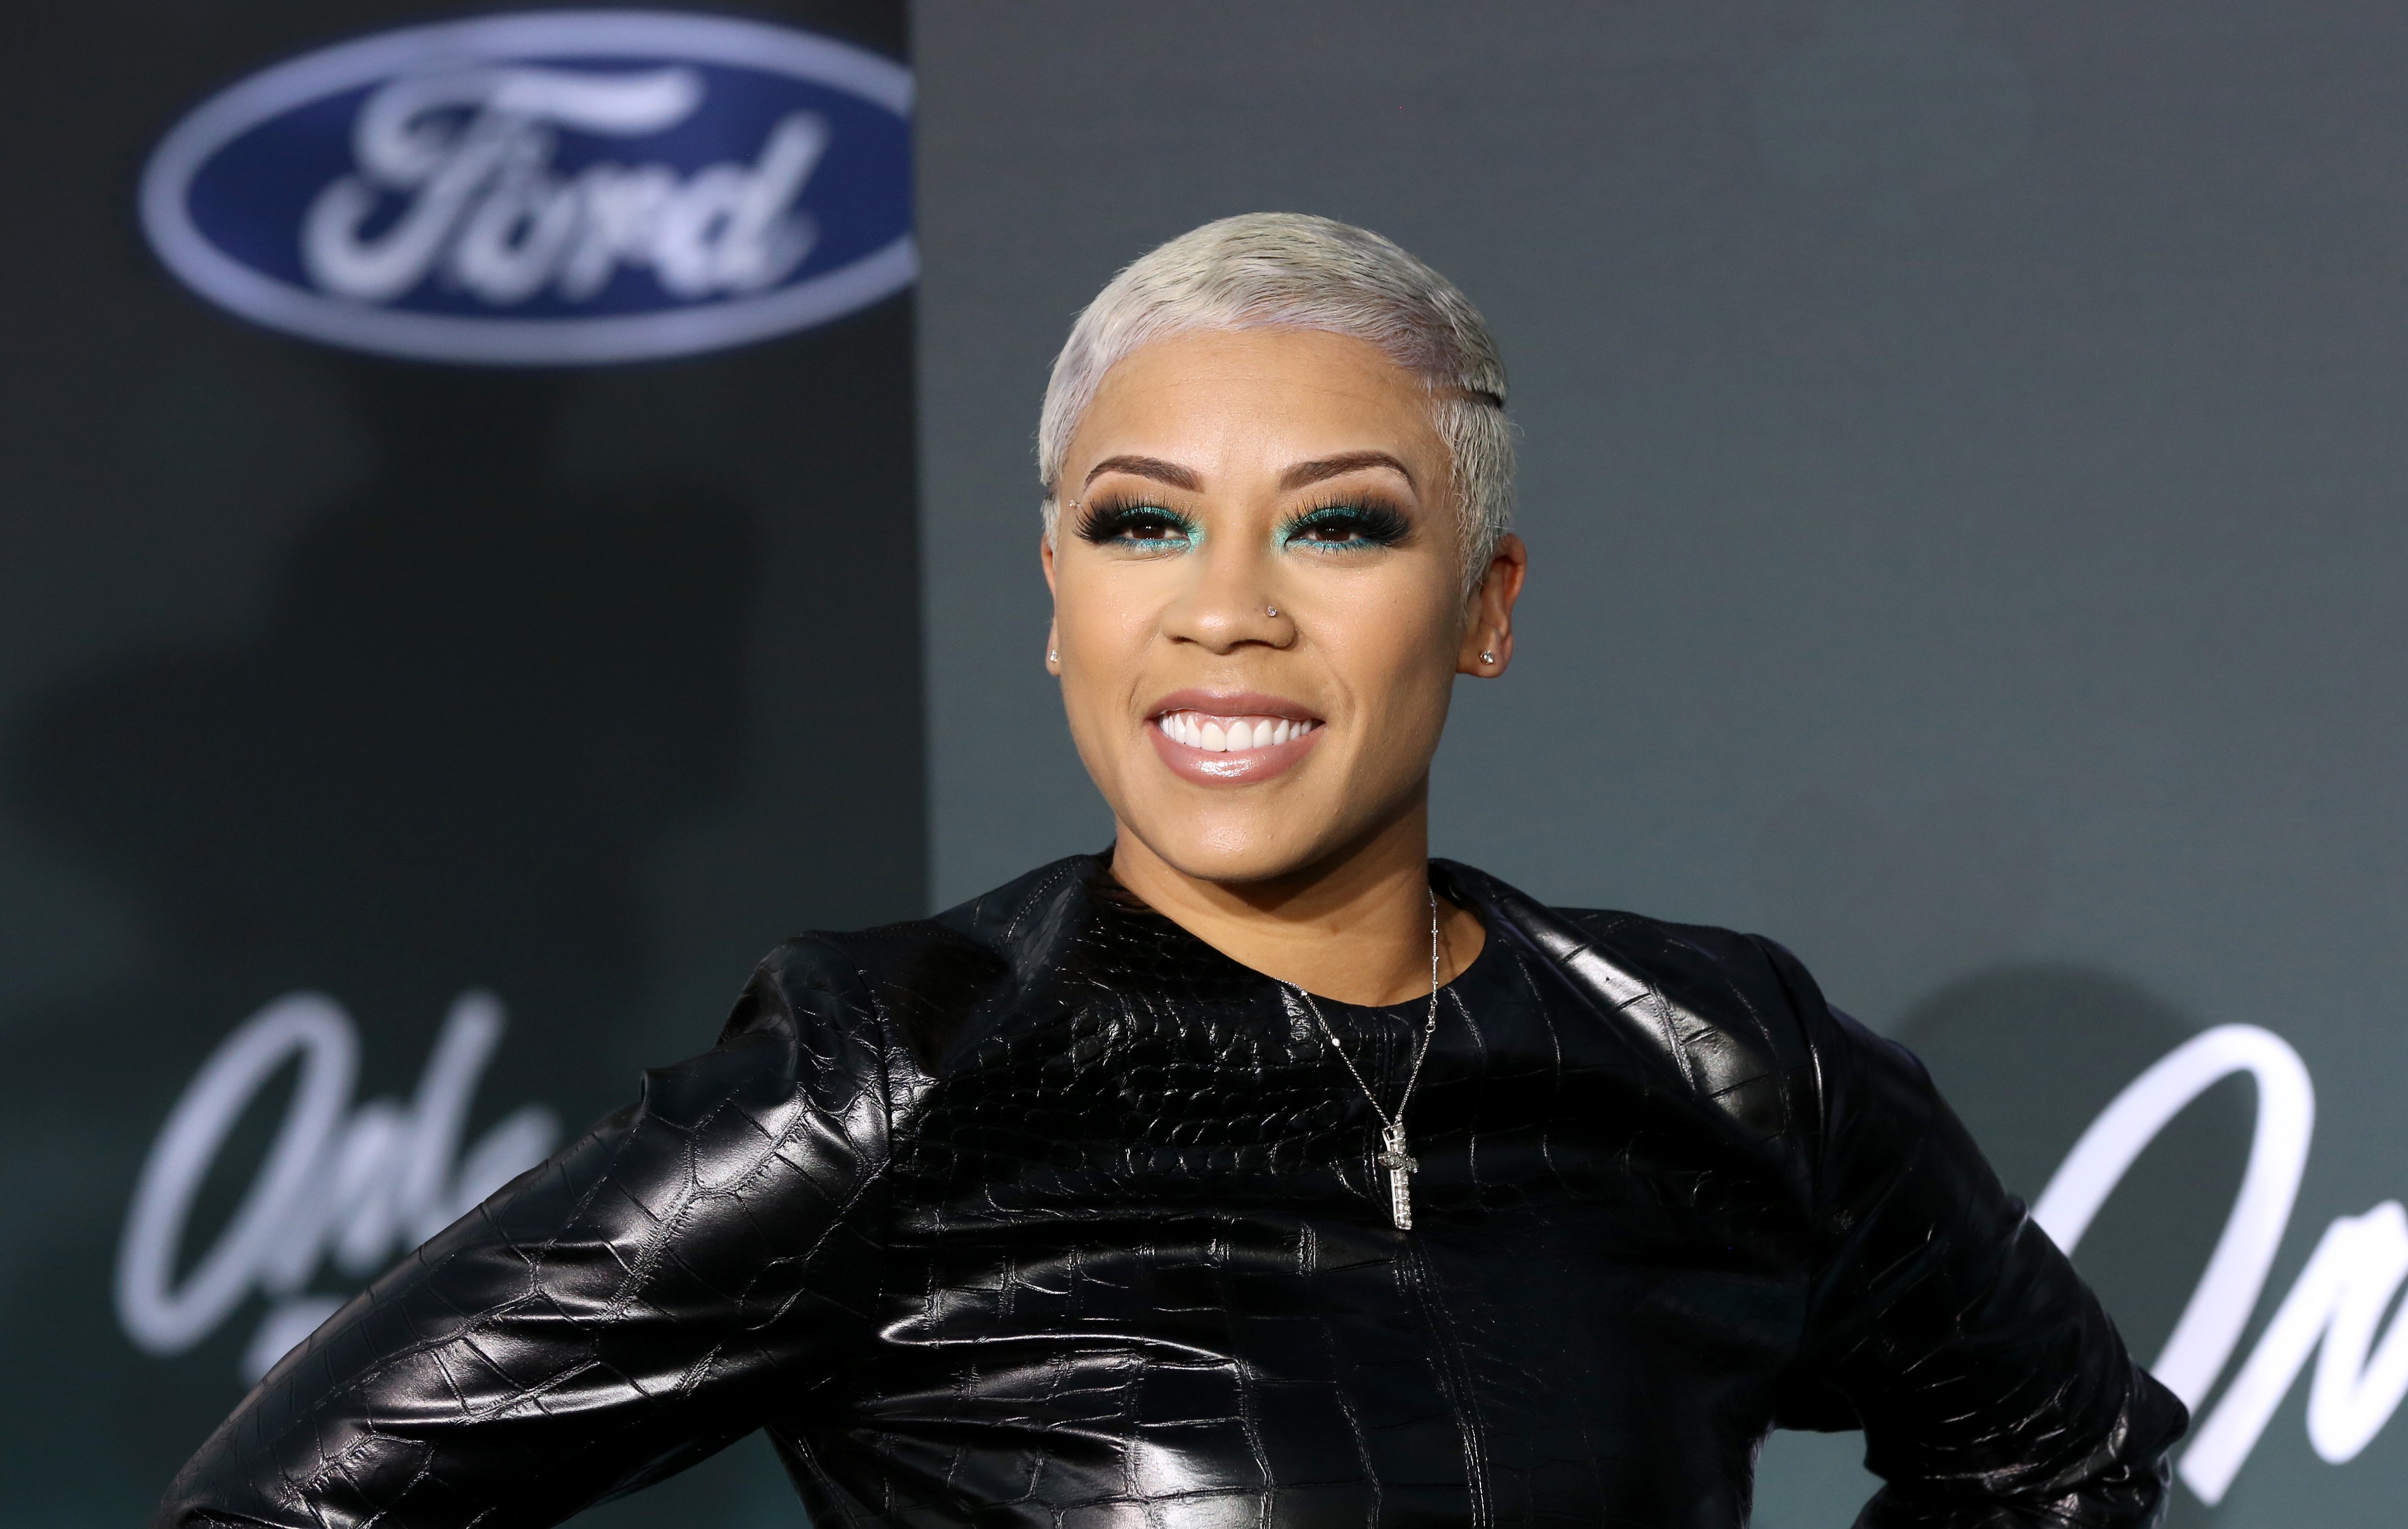 Keyshia Cole attending the 2019 Soul Train Awards in Las Vegas. | Photo: Getty Images